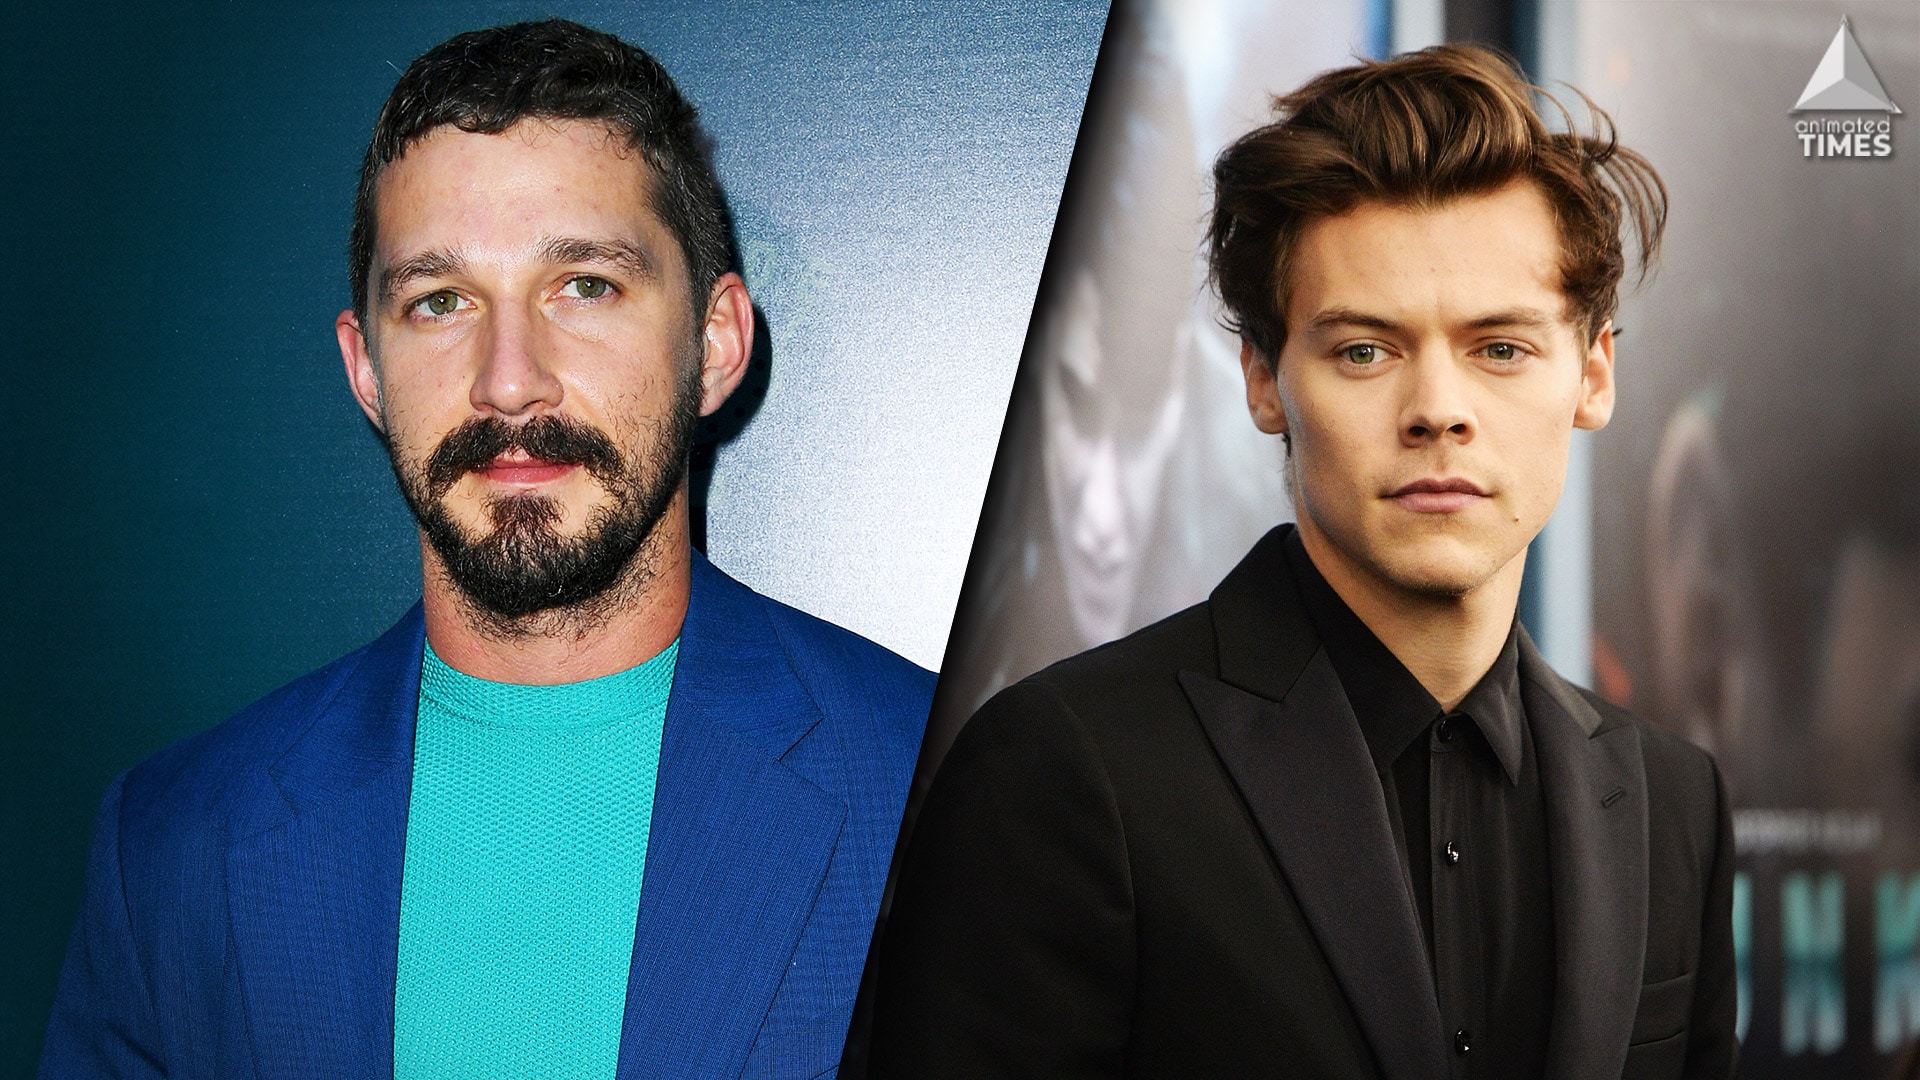 Olivia Wilde Replaces Shia LaBeouf With Harry Styles In Next Directorial Venture